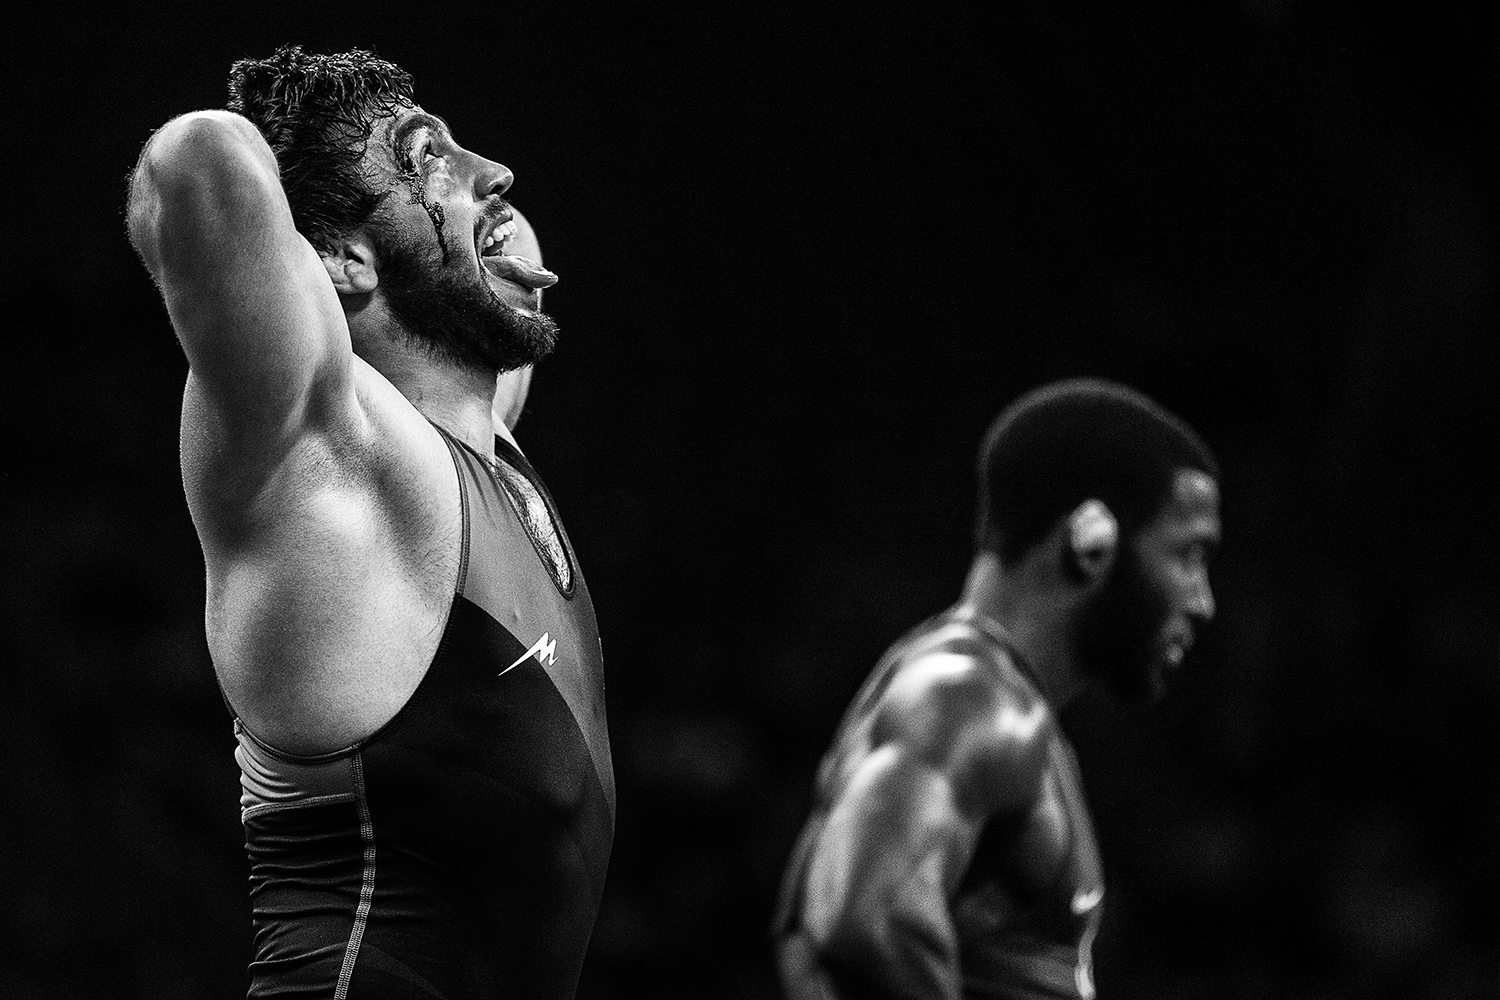  Azerbaijan’s Joshgun Azimov reacts to his victory over America's James Green at 70 kg during the final round of the 2018 Men's Freestyle World Cup at Carver-Hawkeye Arena in Iowa City on April 7, 2018. 